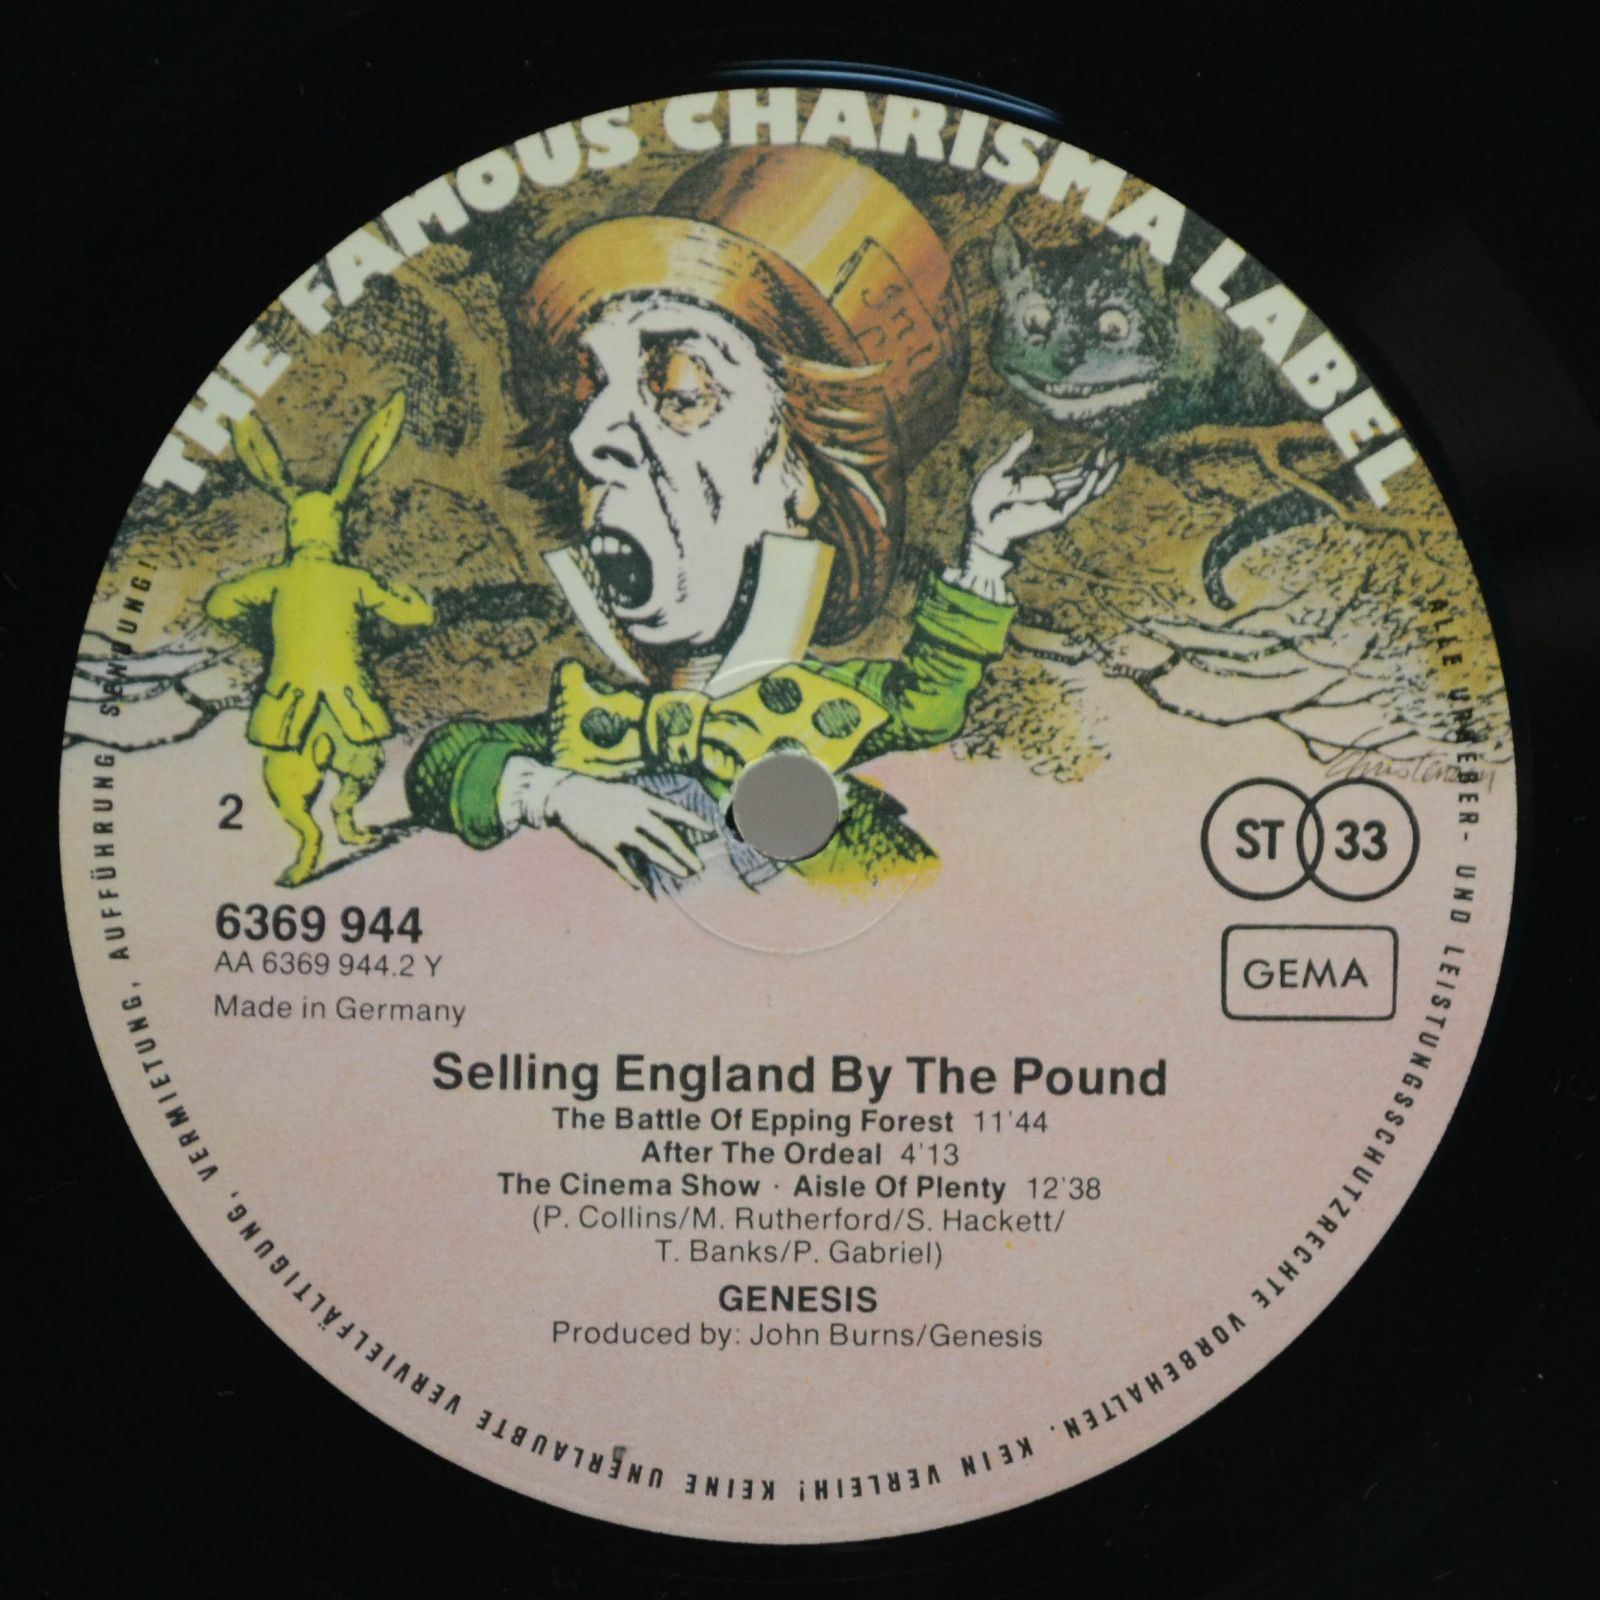 Genesis — Selling England By The Pound, 1973